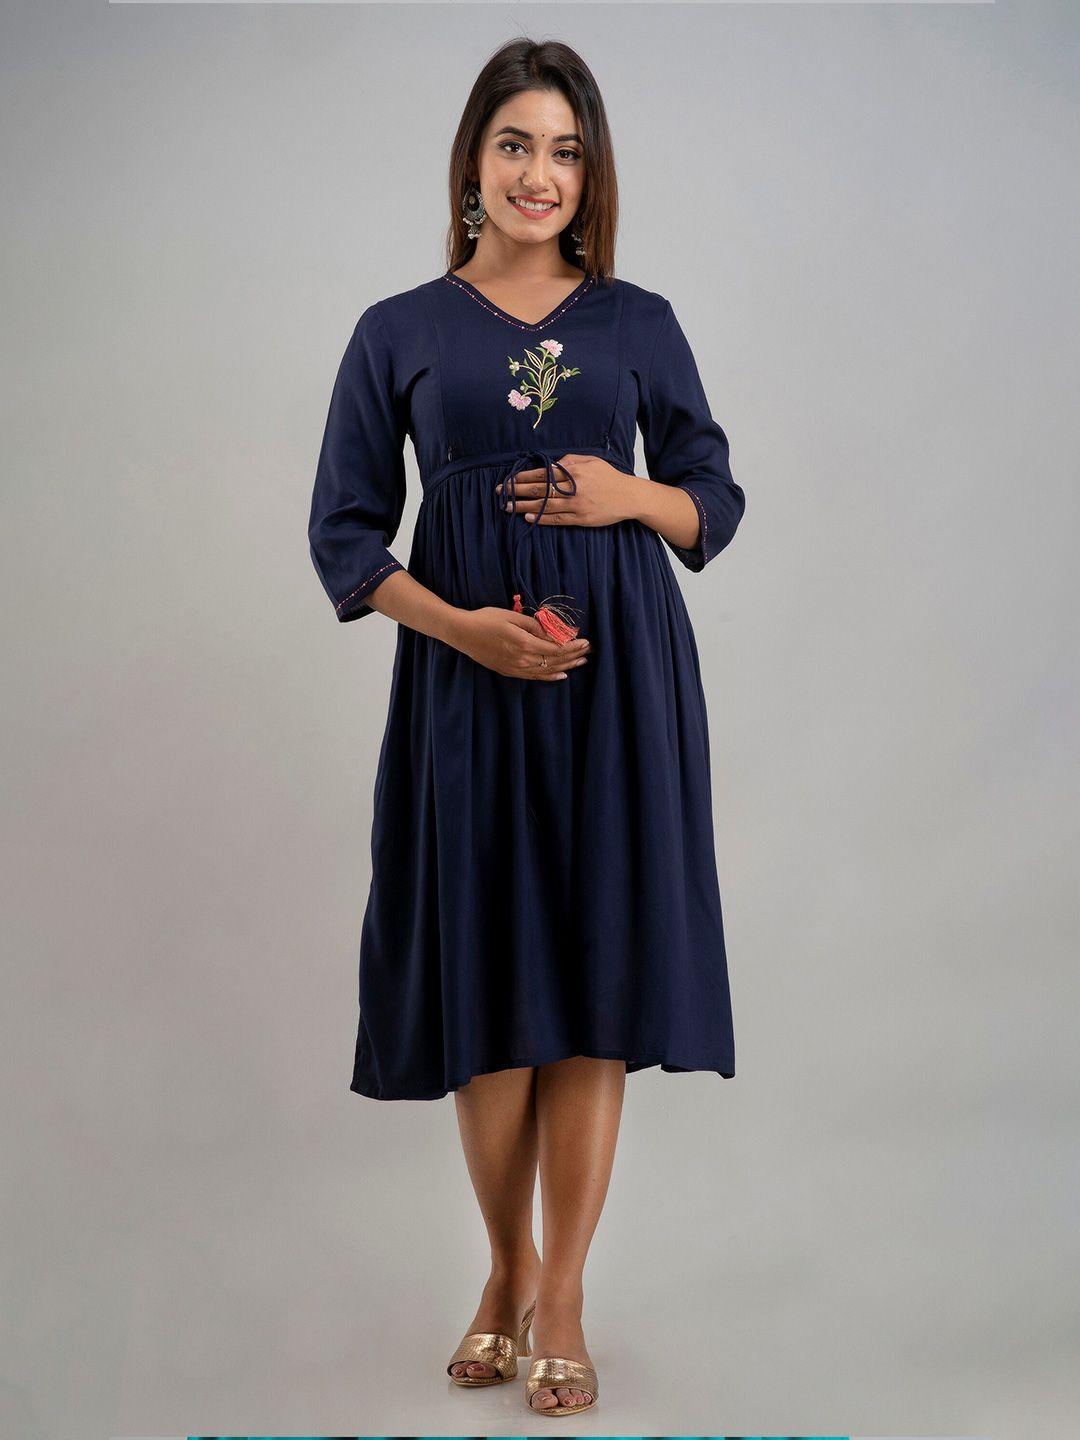 misbis navy blue floral embroidered side zip maternity empire midi dress